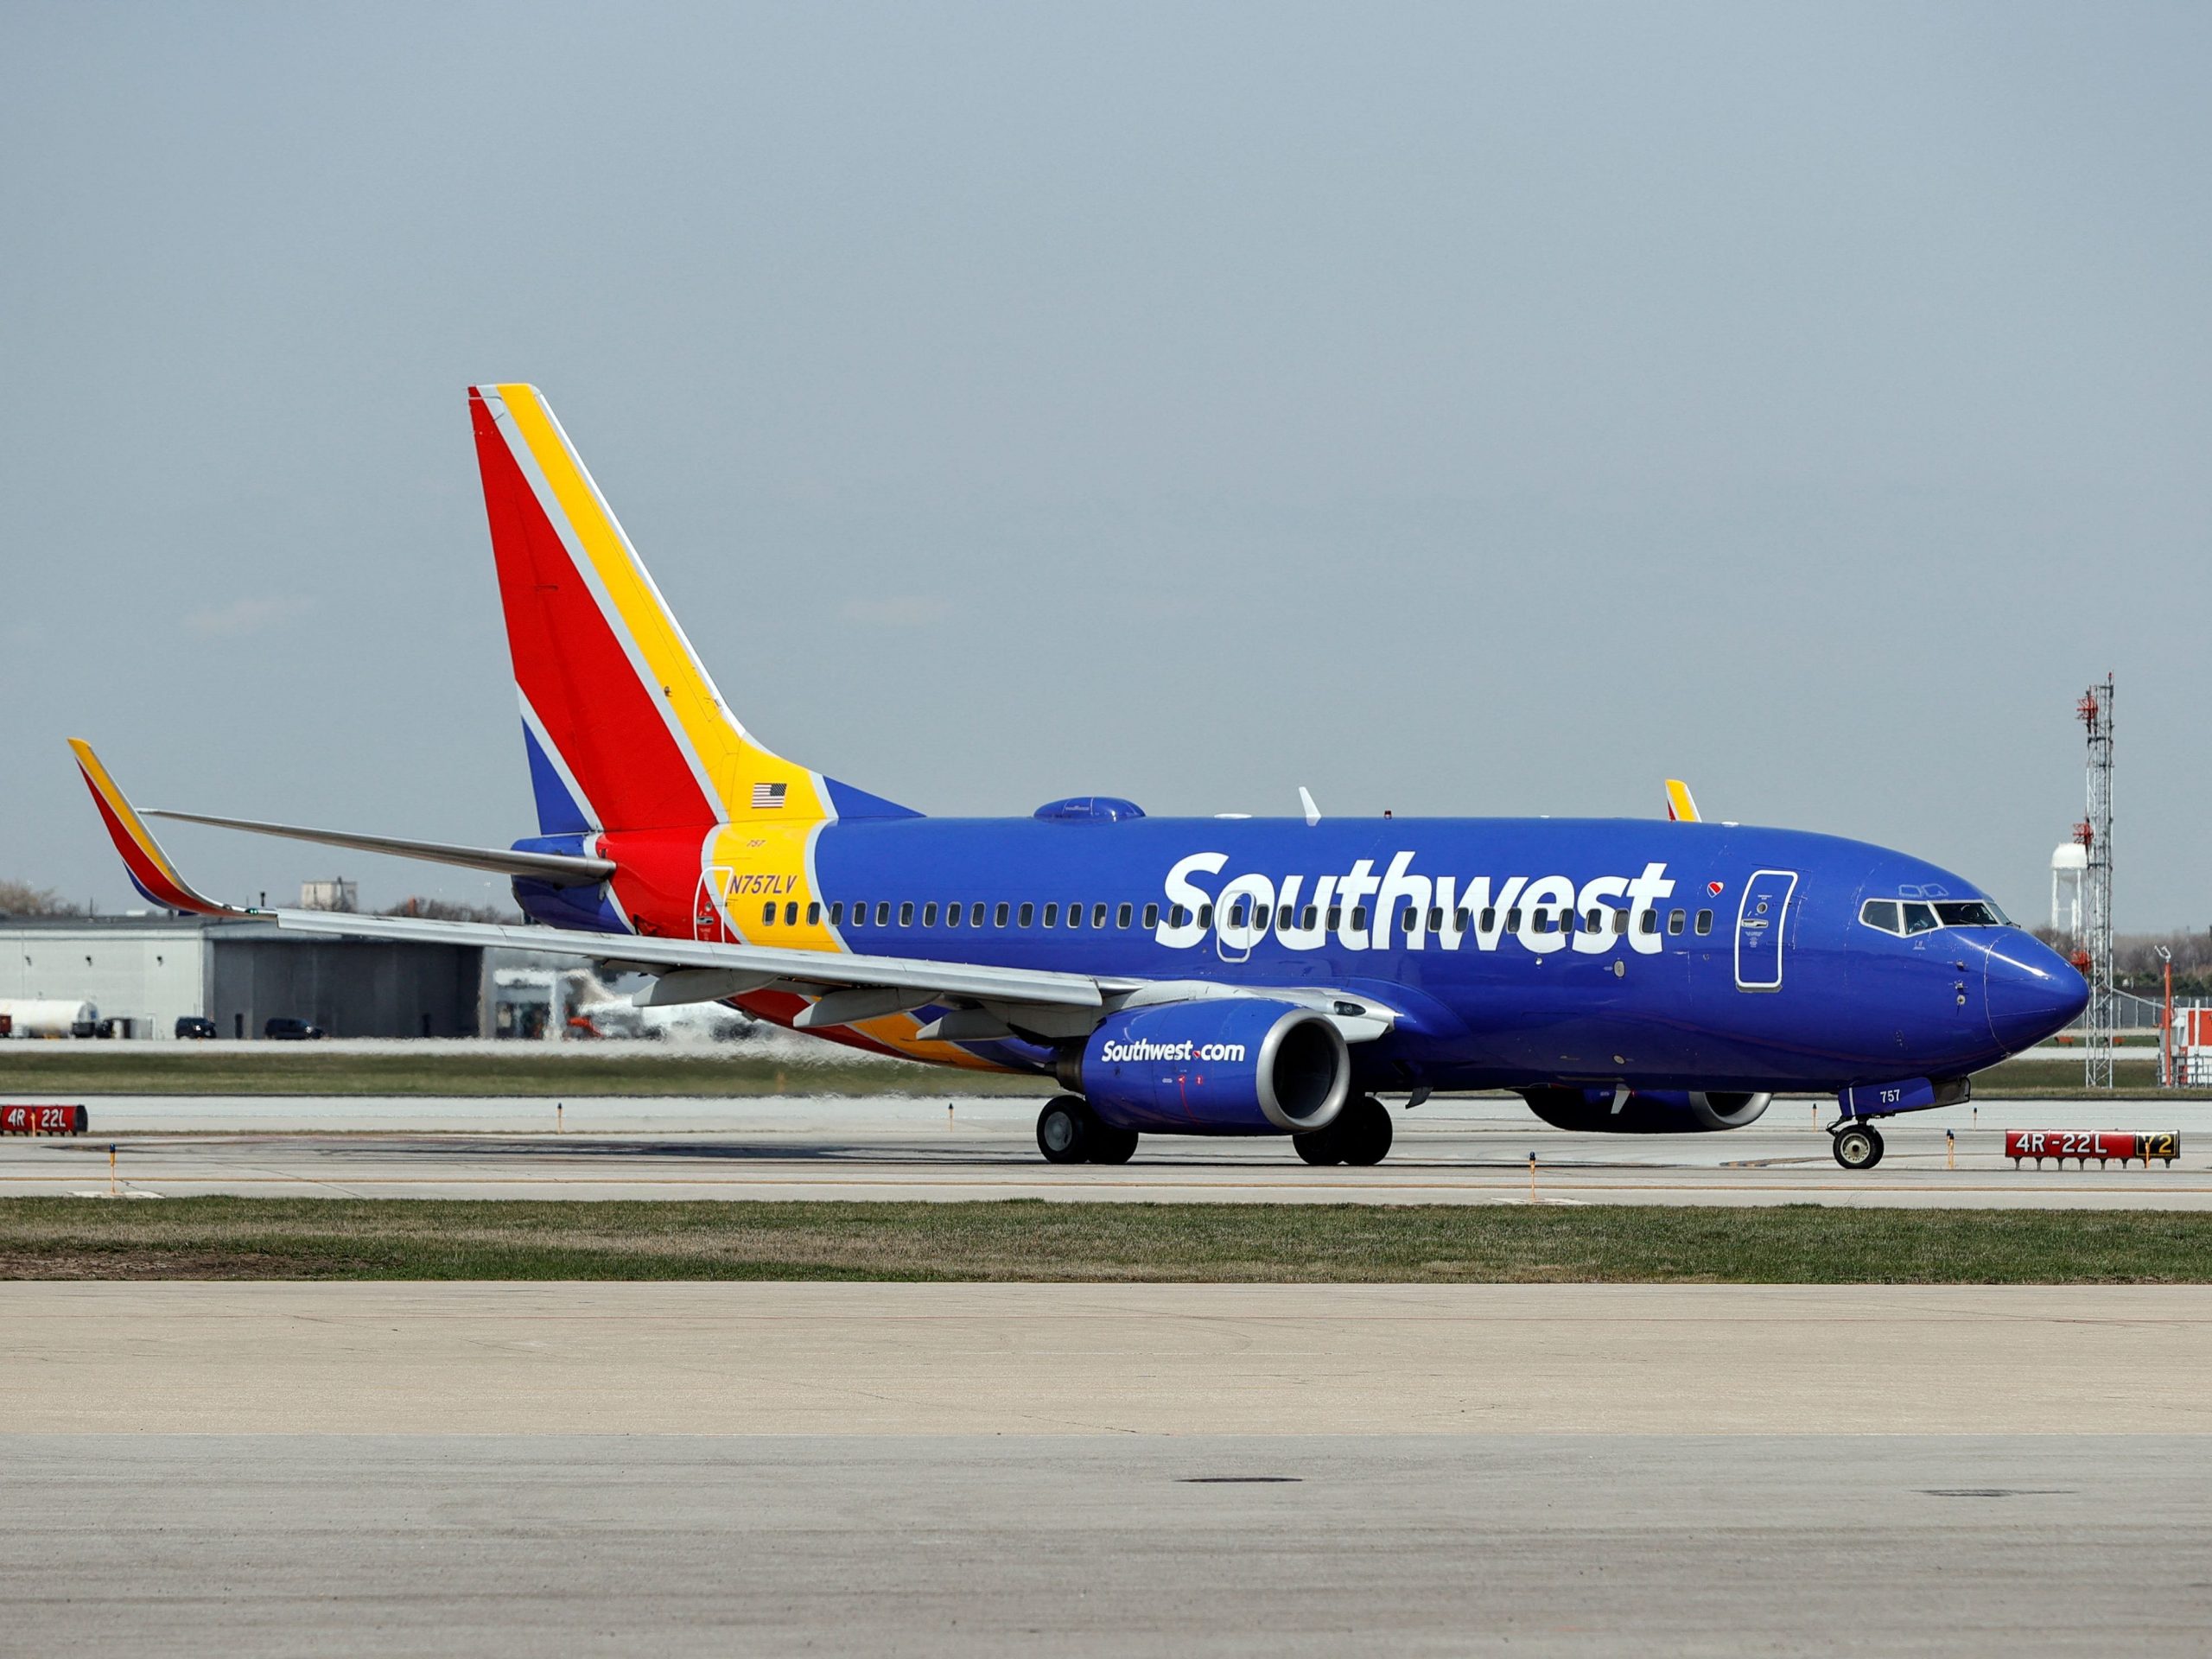 A Southwest Airlines Boeing 737-7H4 jet taxis to the gate